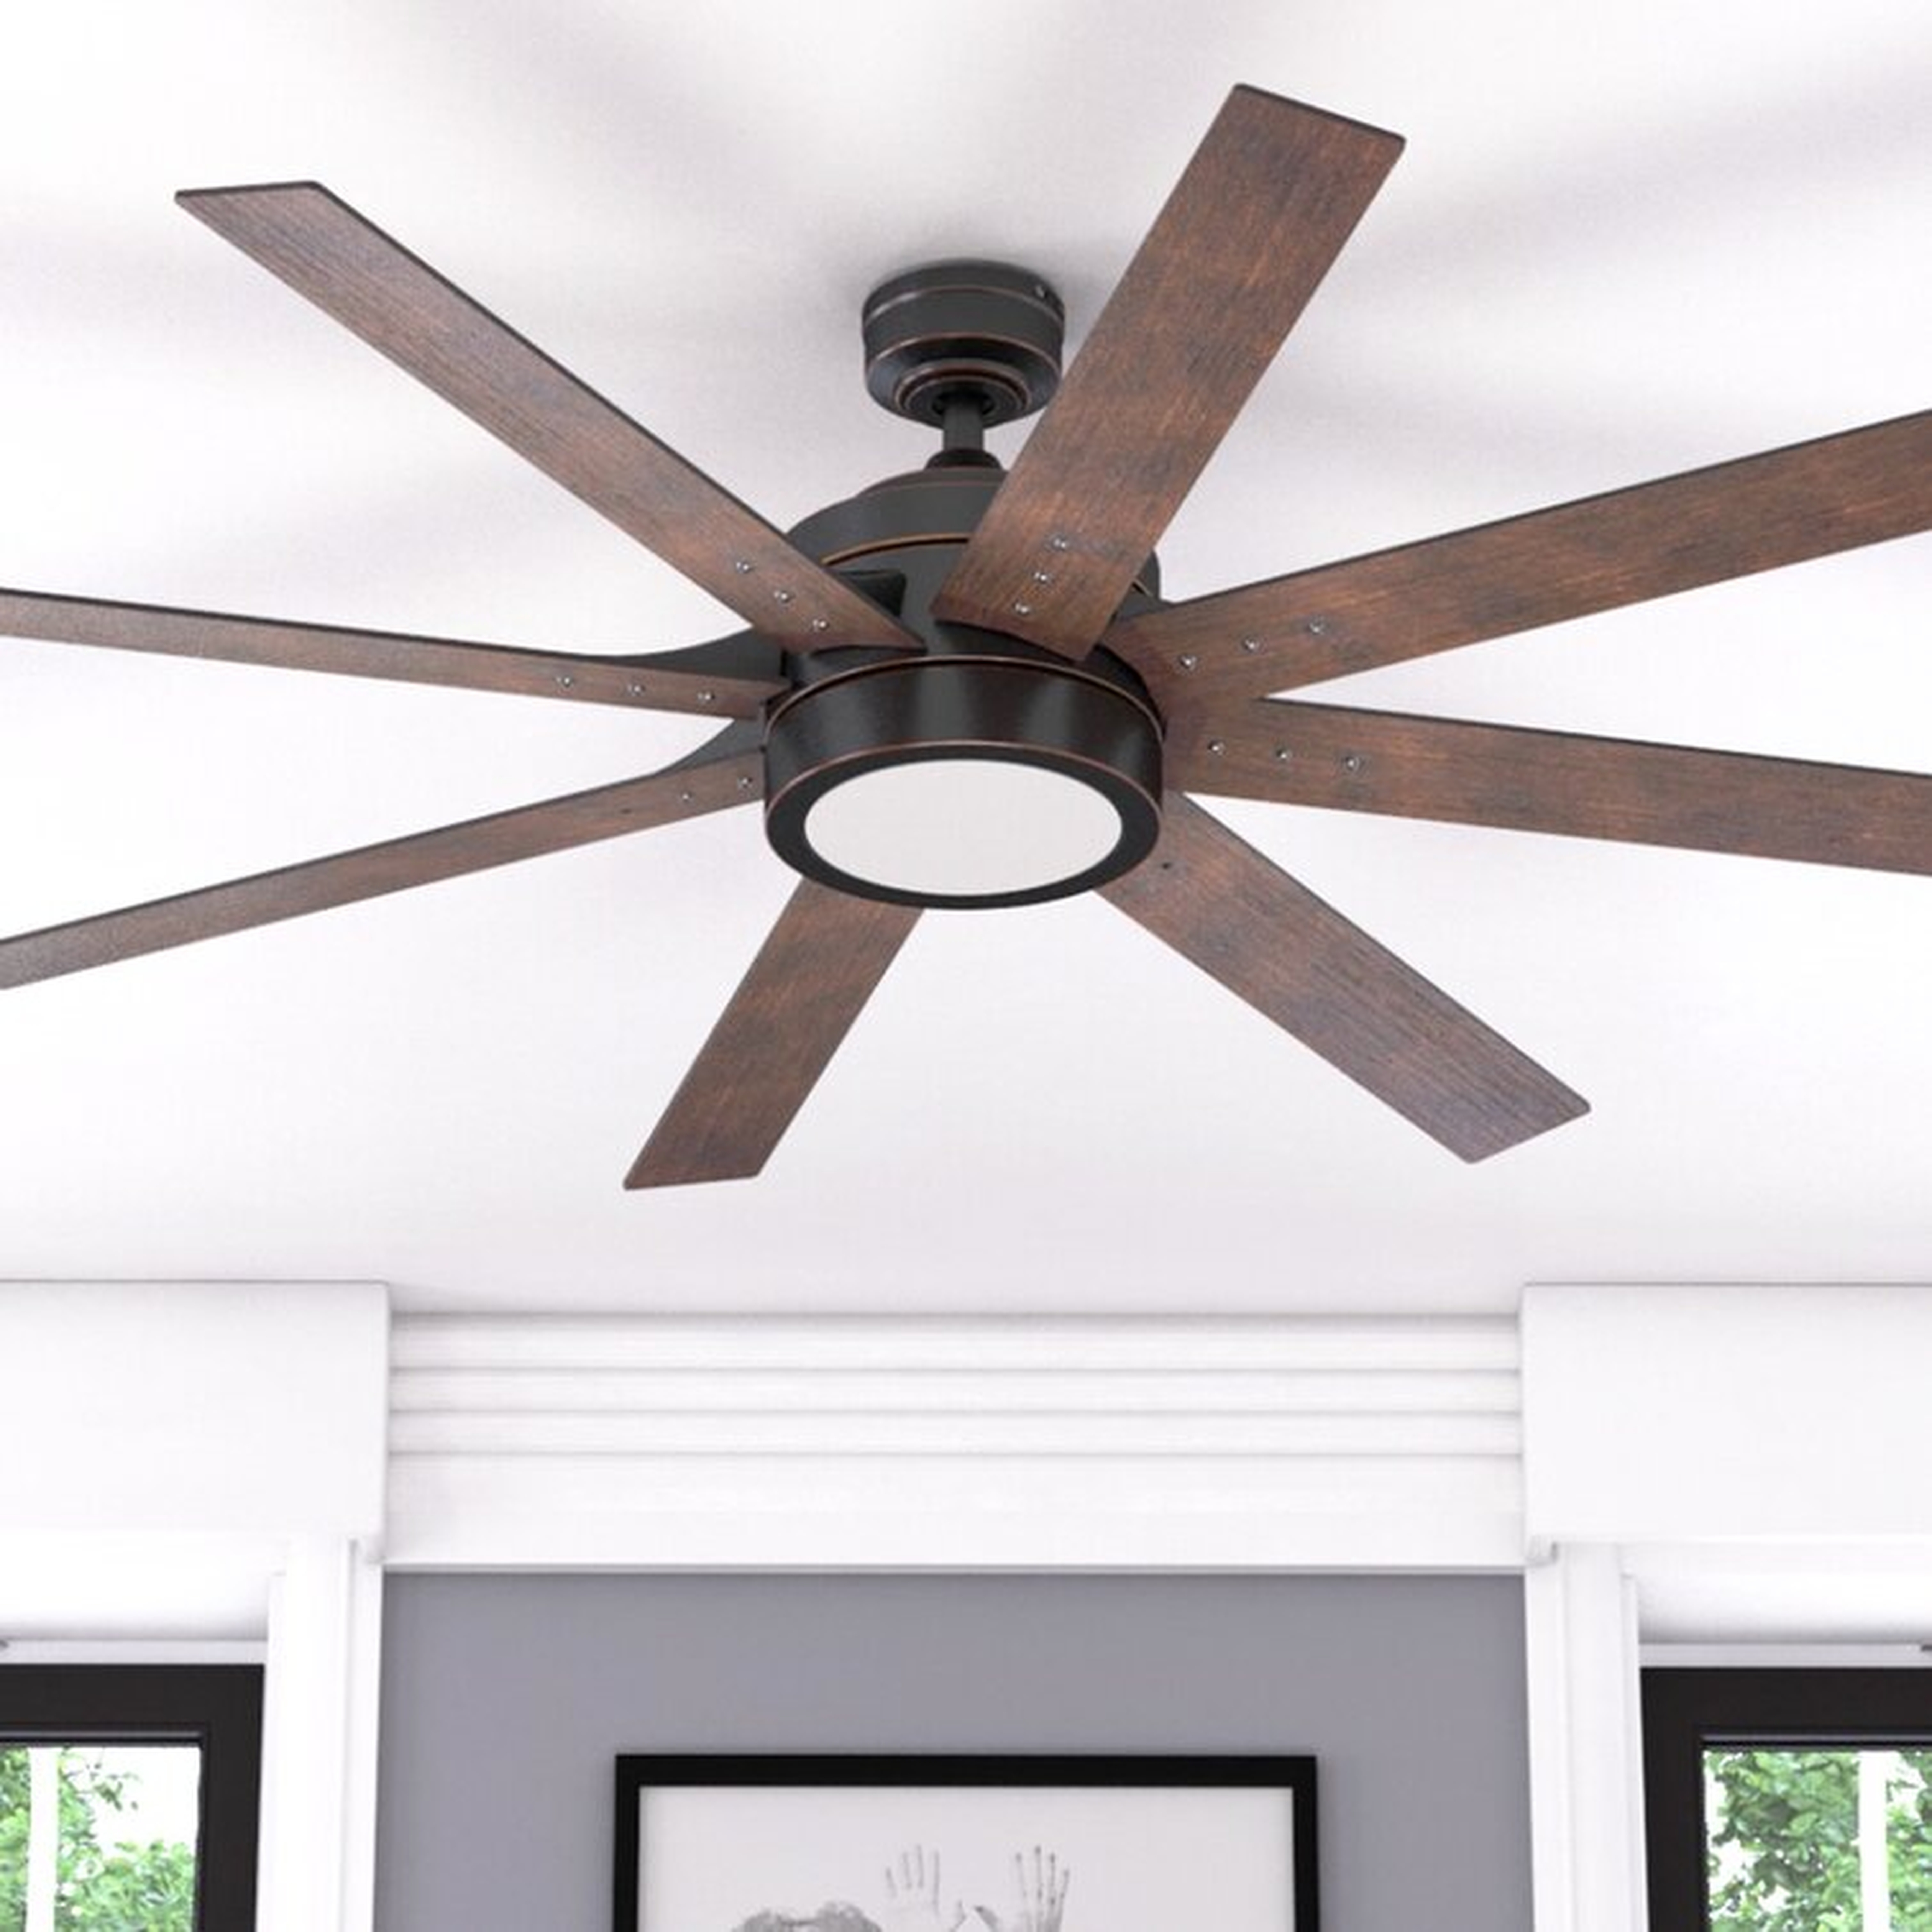 62'' Centre Market Place 8 - Blade LED Standard Ceiling Fan with Remote Control and Light Kit Included - Wayfair